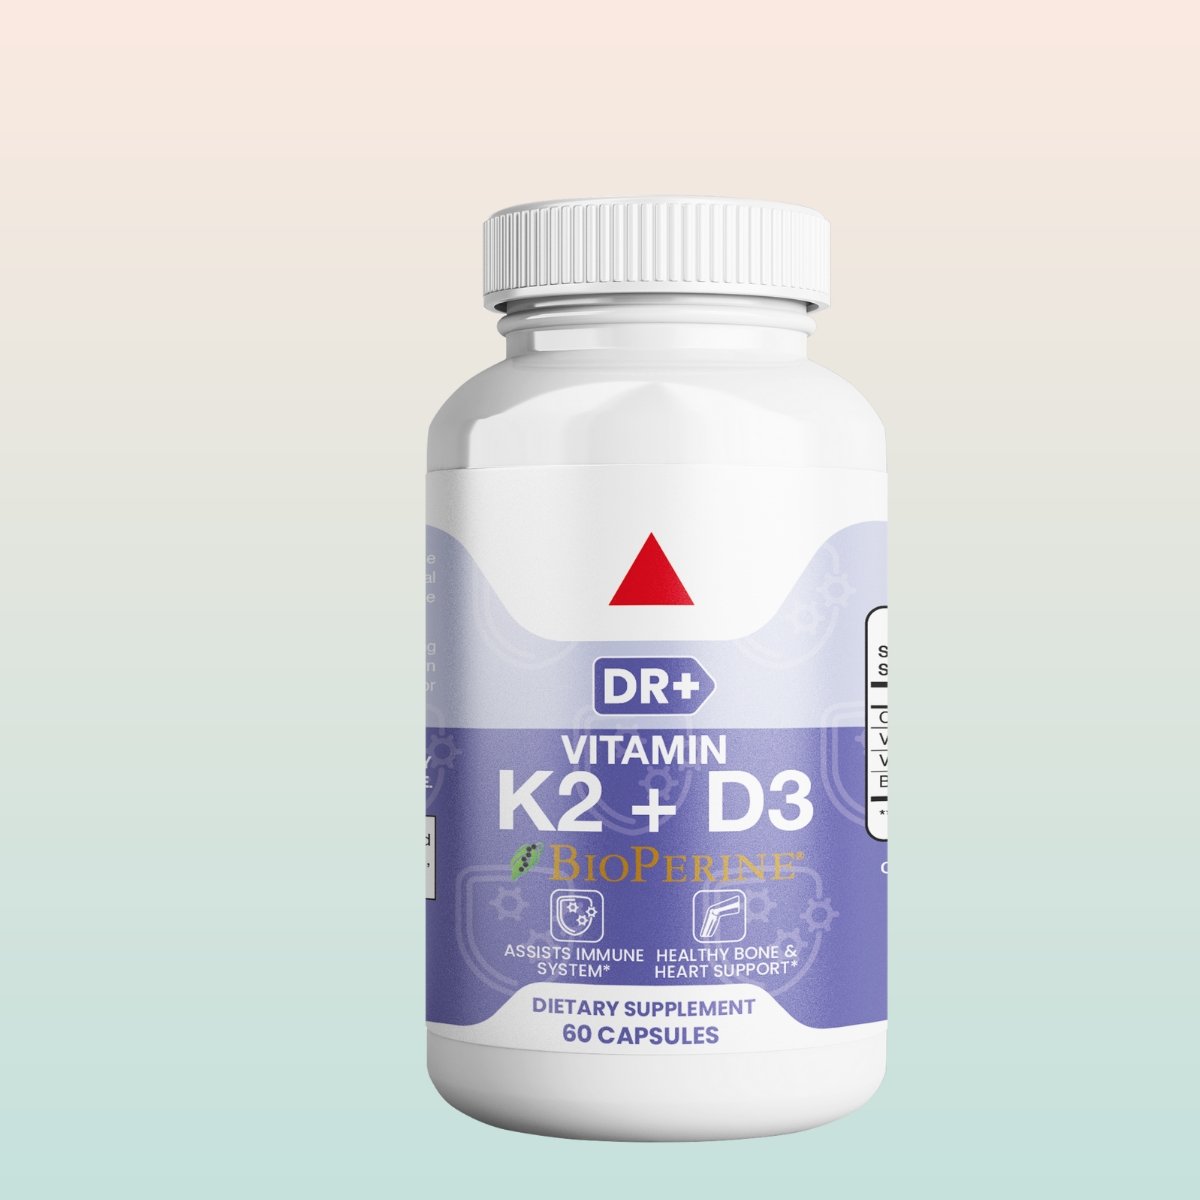 Vitamin K2 (MK7) with D3 5000 IU Supplement for Immune System